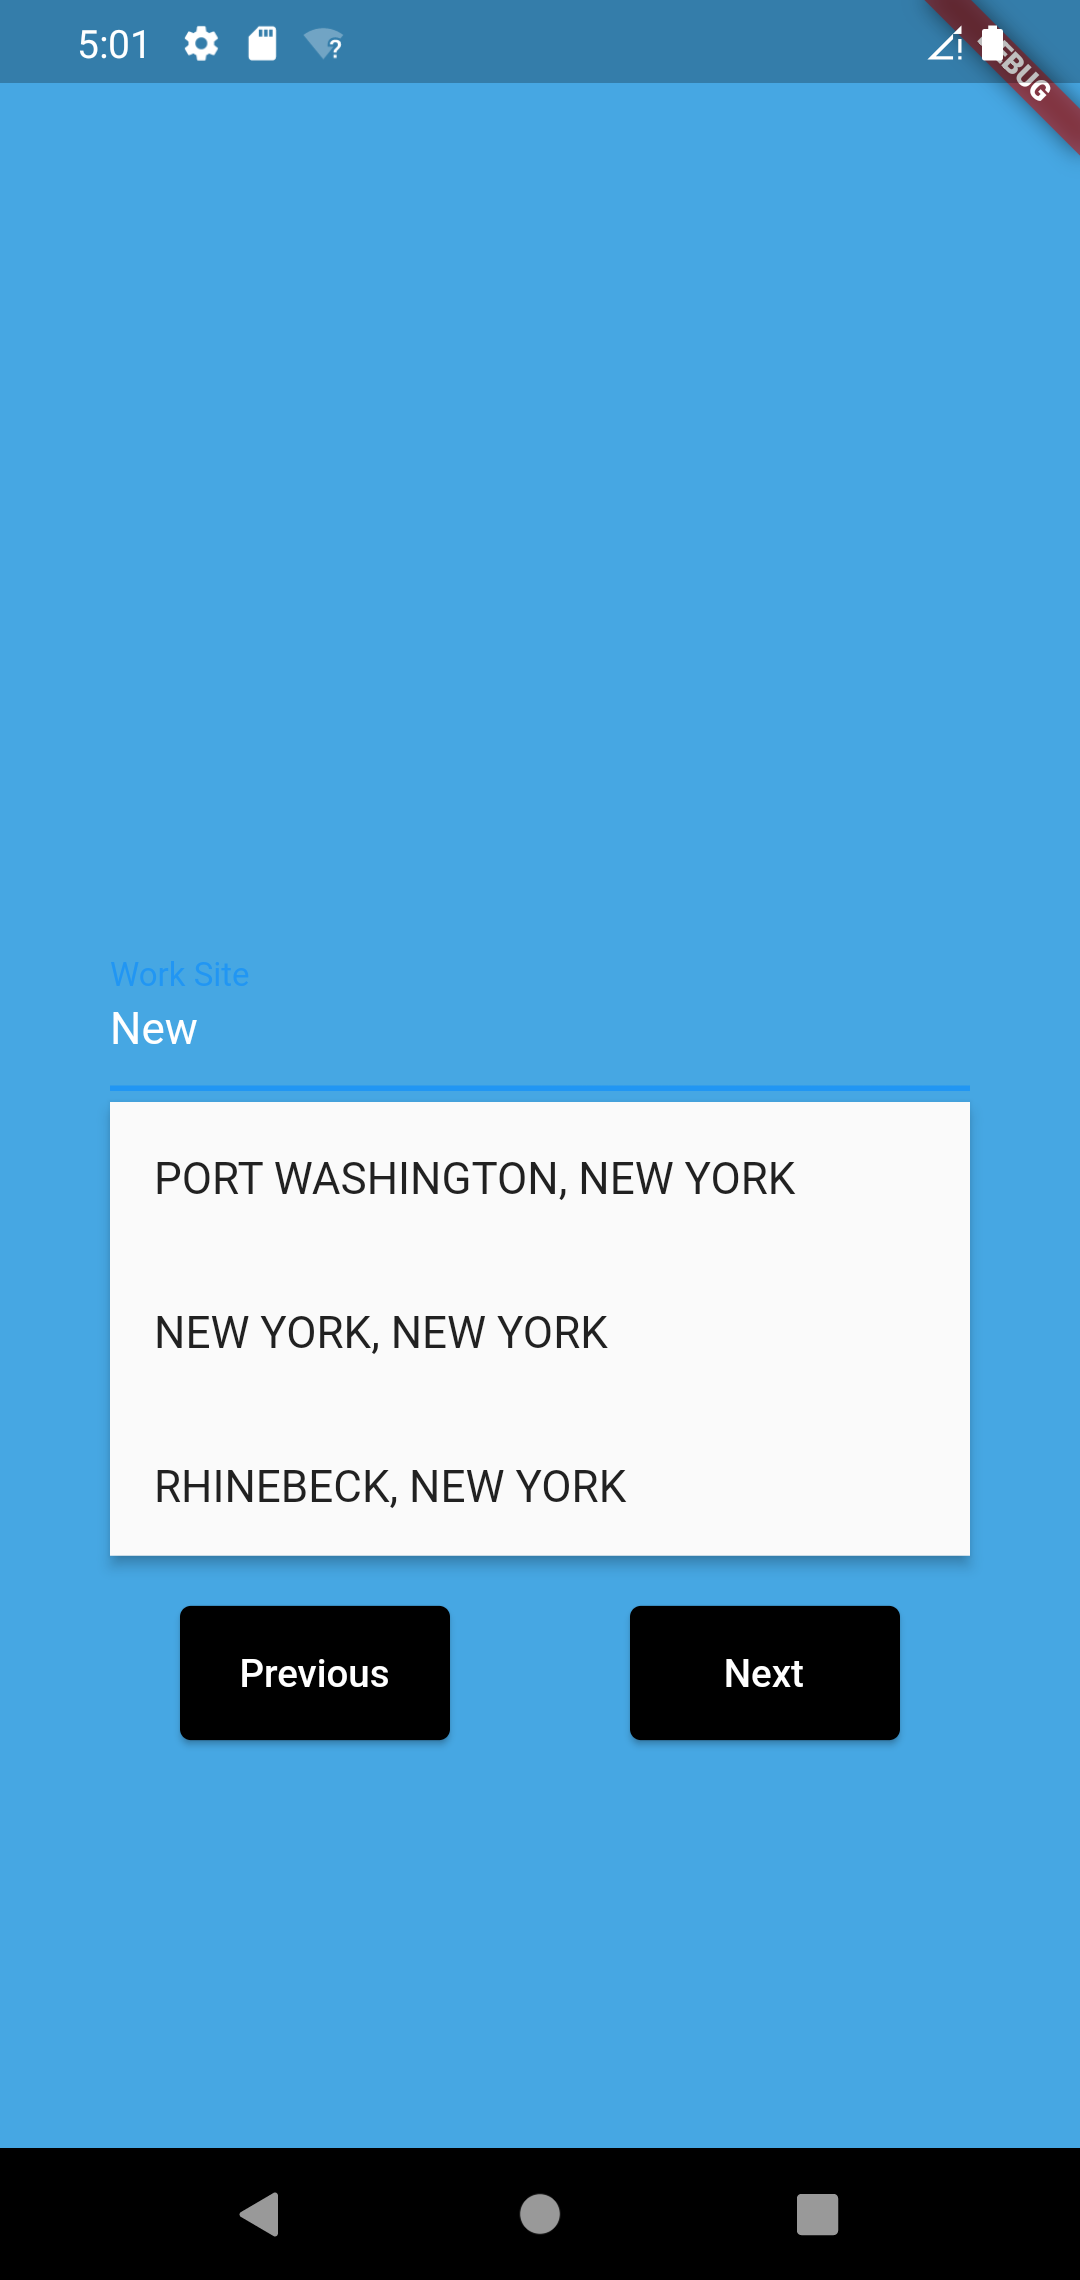 A Flutter App that predicts the H1b visa acceptence based on the Deep Neural Network Model